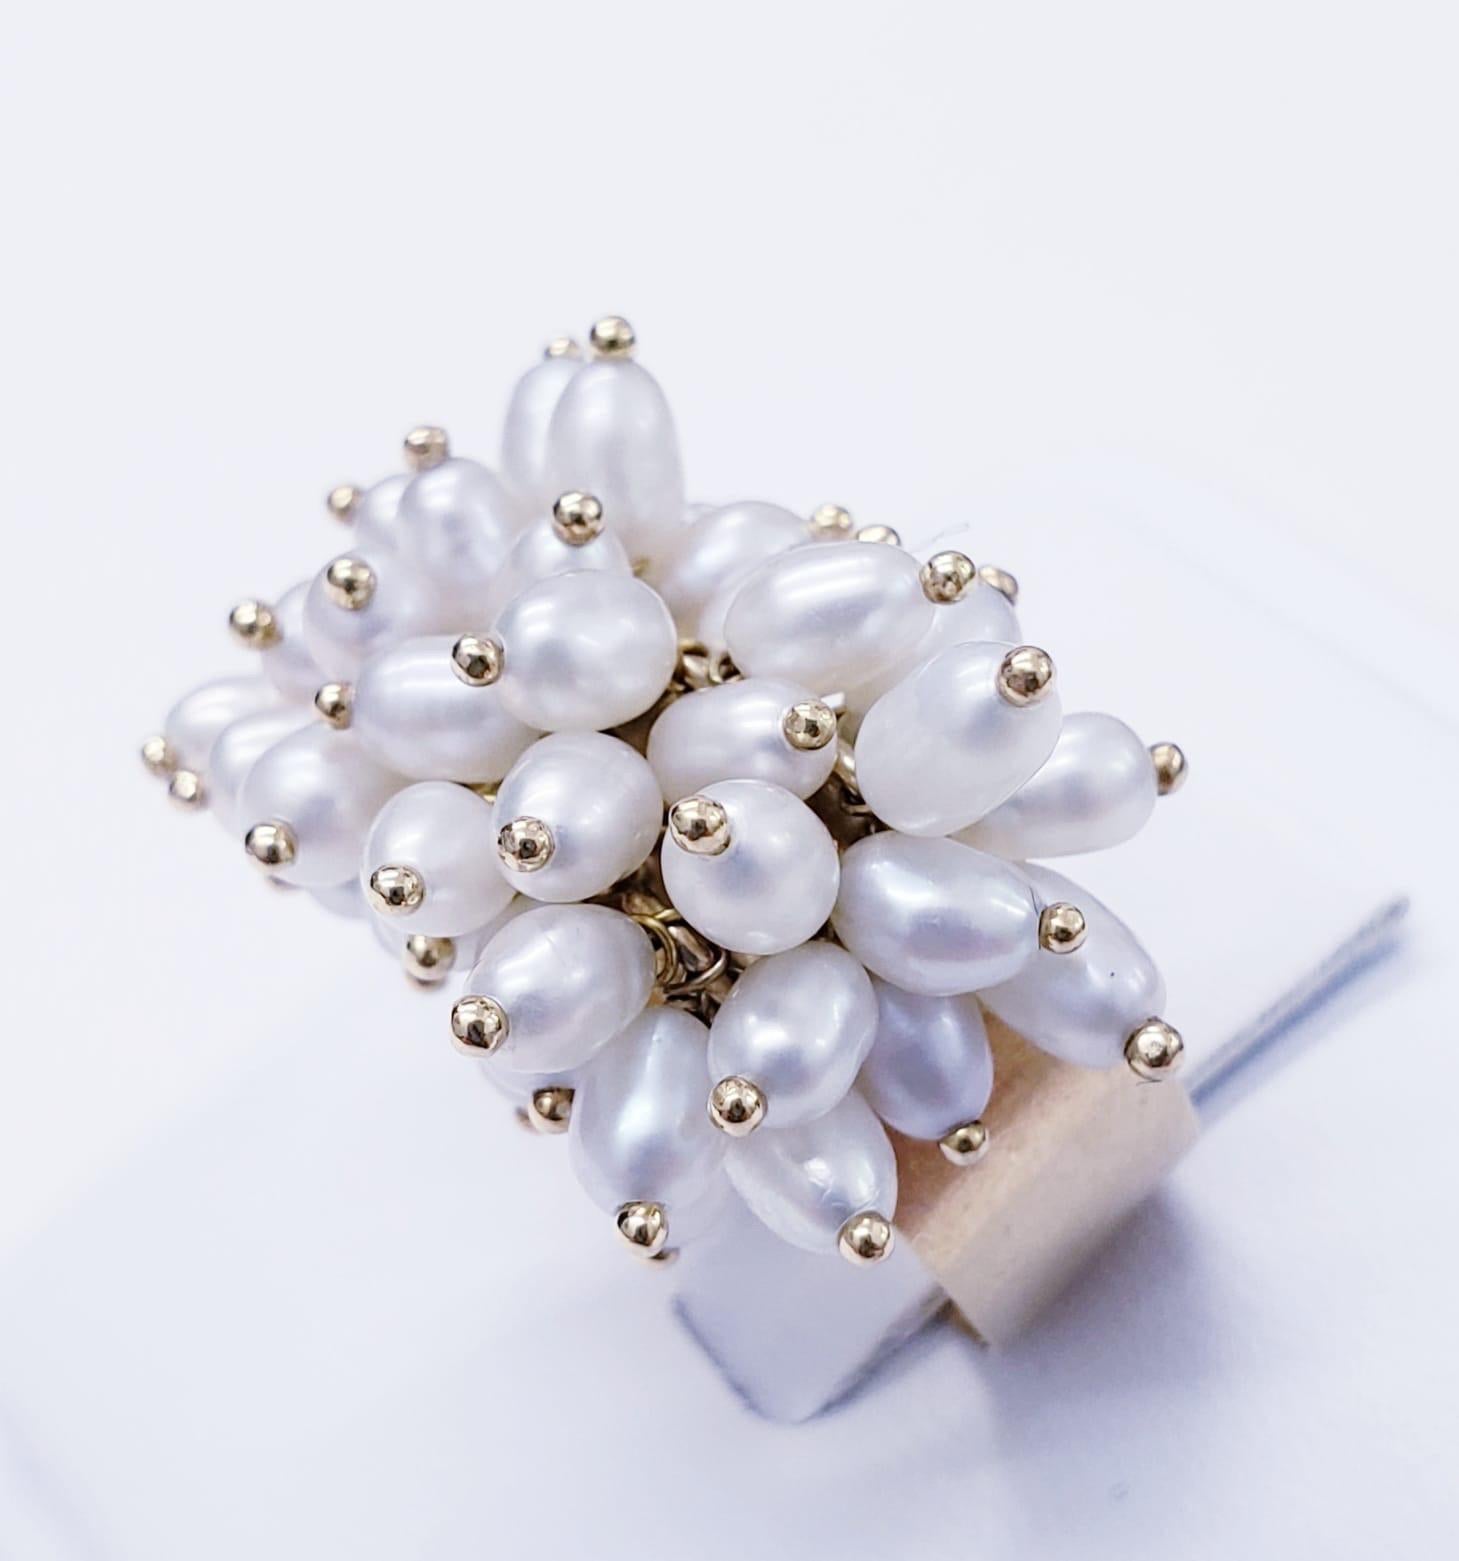 Vintage Fresh Water Pearls 18k Gold Cluster Ring. The ring weights 7.1 grams. The ring size is 7. The fresh water pearls give this ring an amazing look. The ring measures 25mm X 9.2mm.